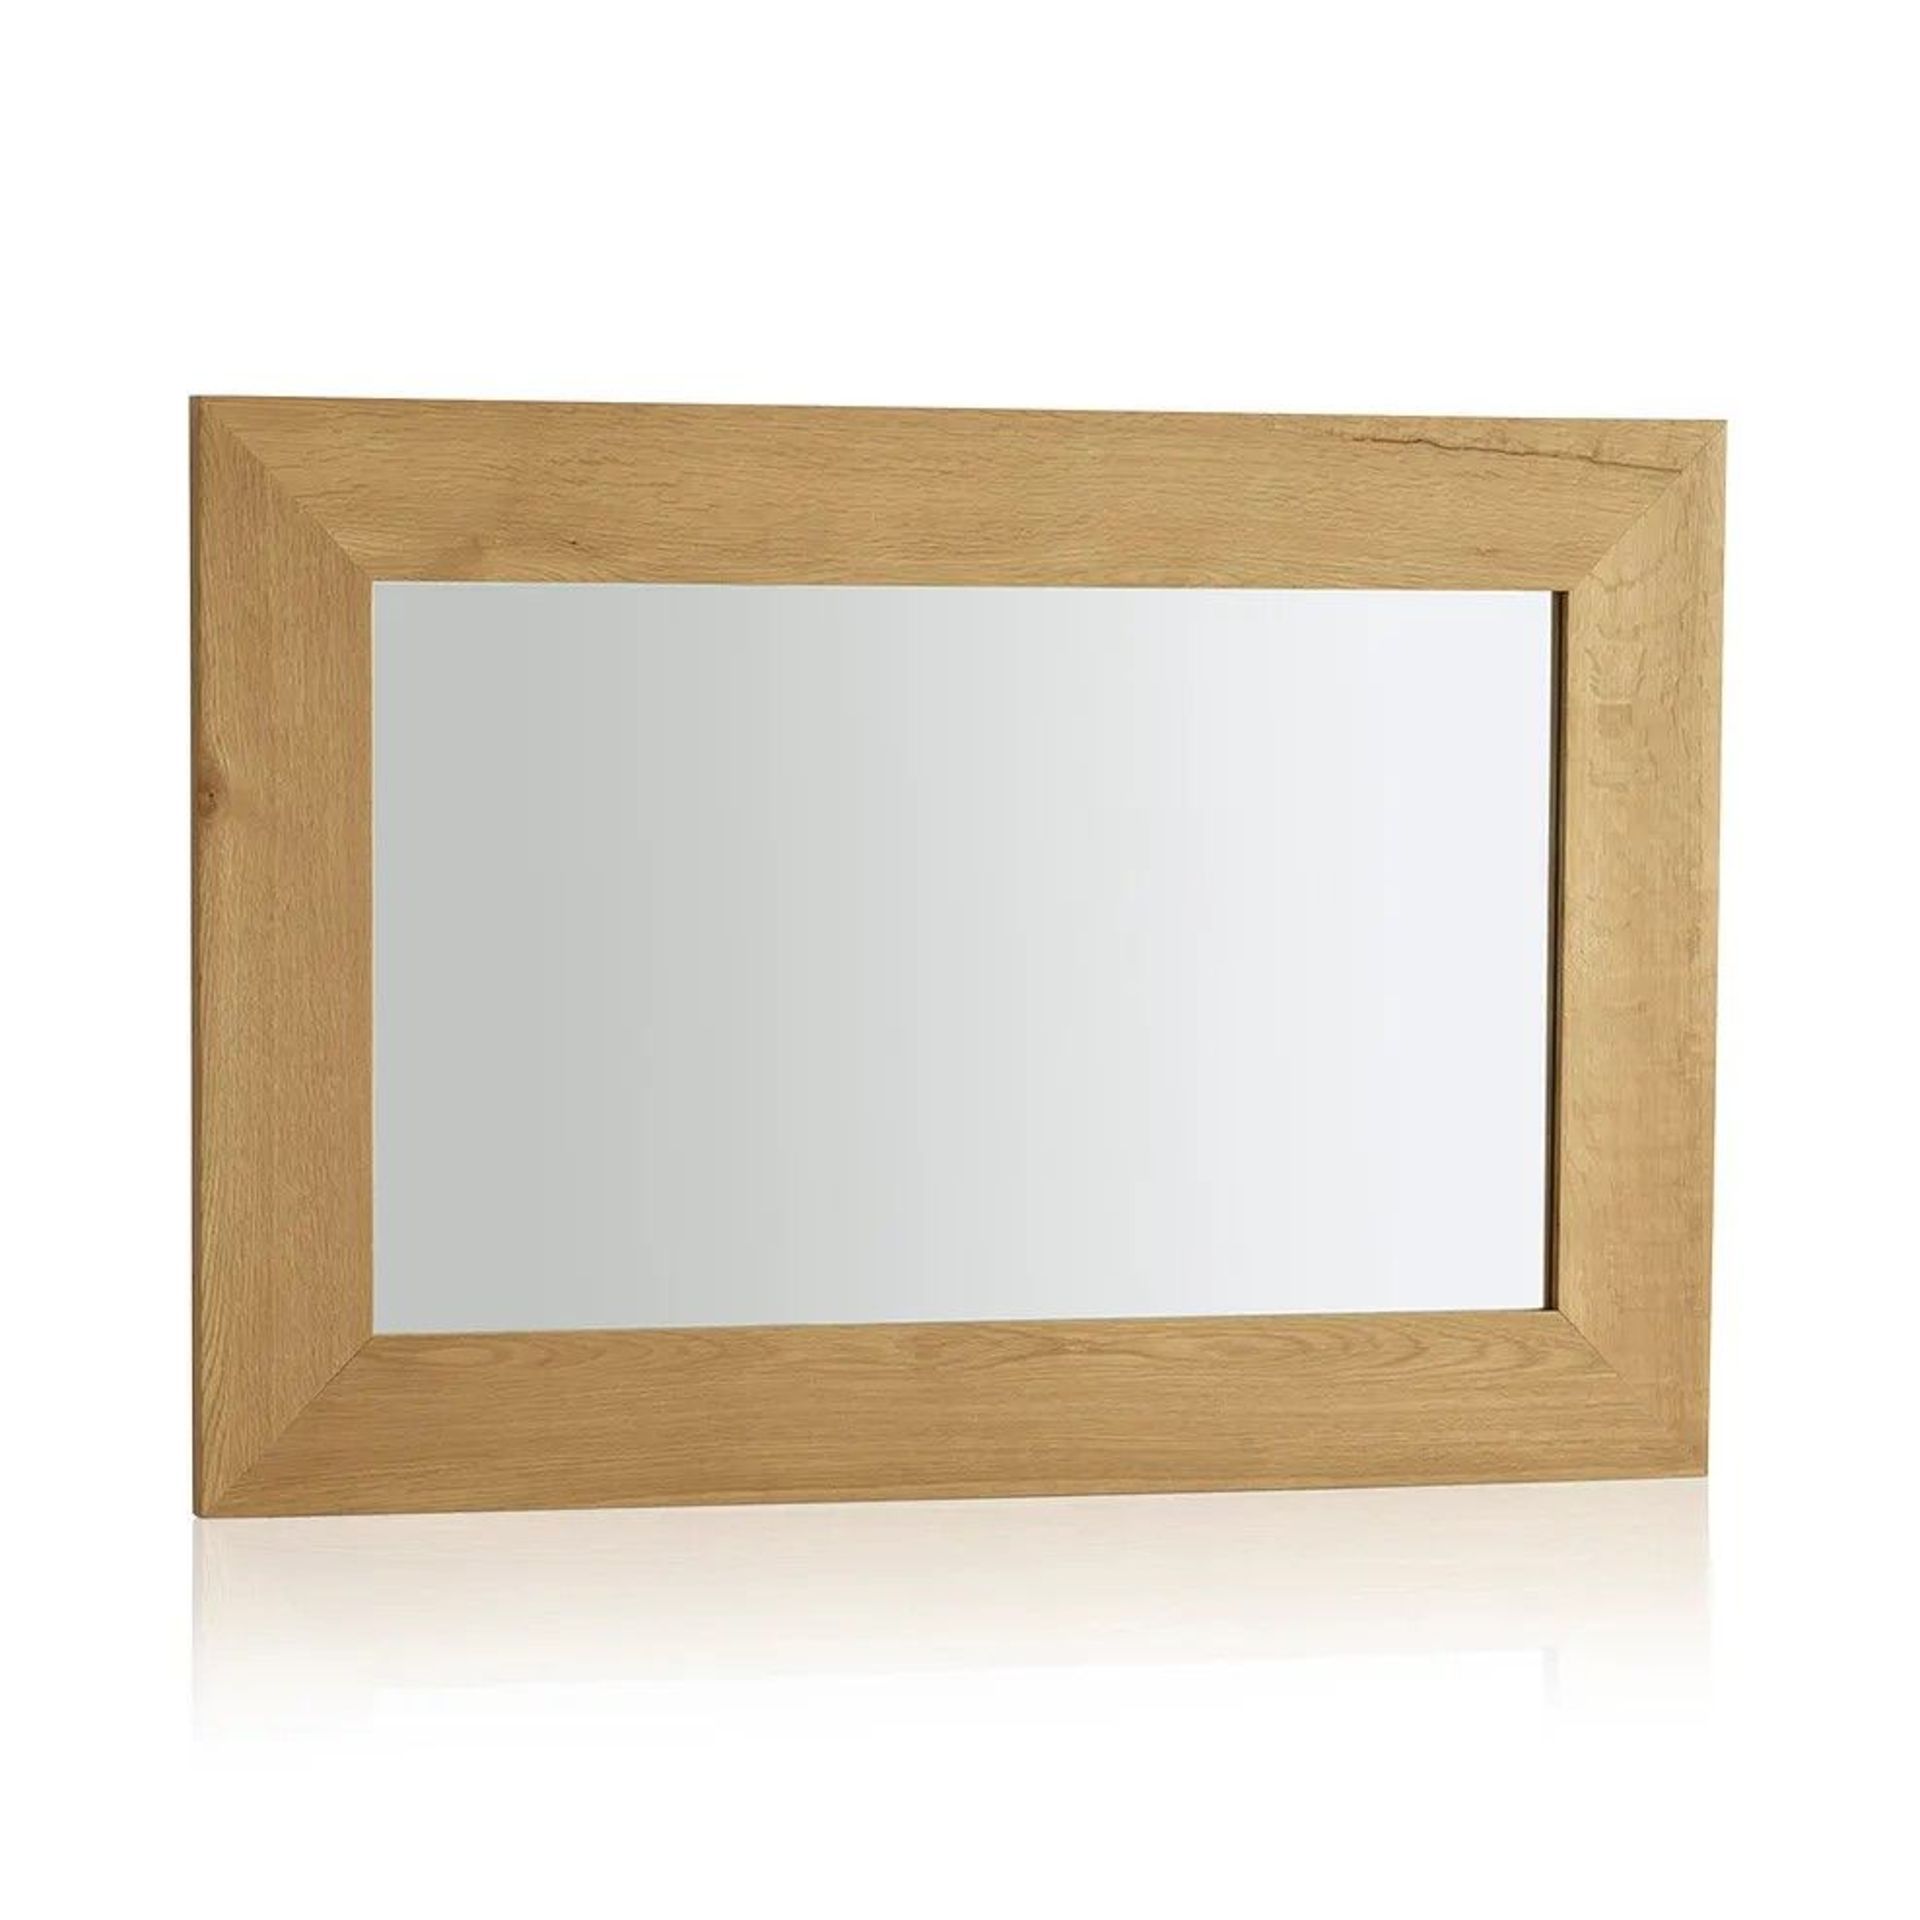 5 X NEW BOXED Cosmopolitan Mirror Natural Solid Oak 900mm x 600mm Wall Mirror. RRP £269.99 EACH, - Image 2 of 2